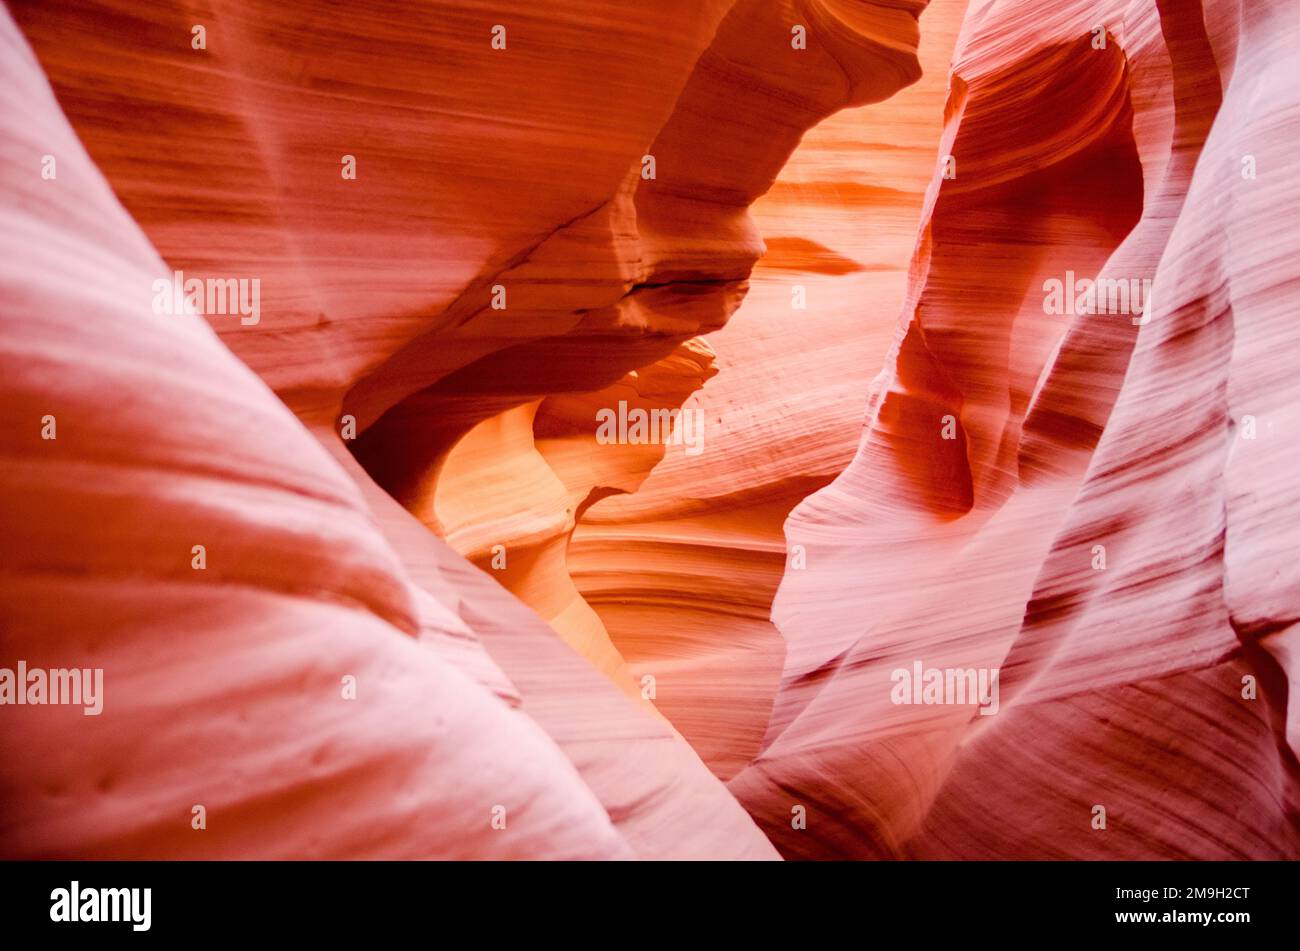 The beautifully smooth and red sandstone walls of Antelope Canyon in Arizona, USA Stock Photo